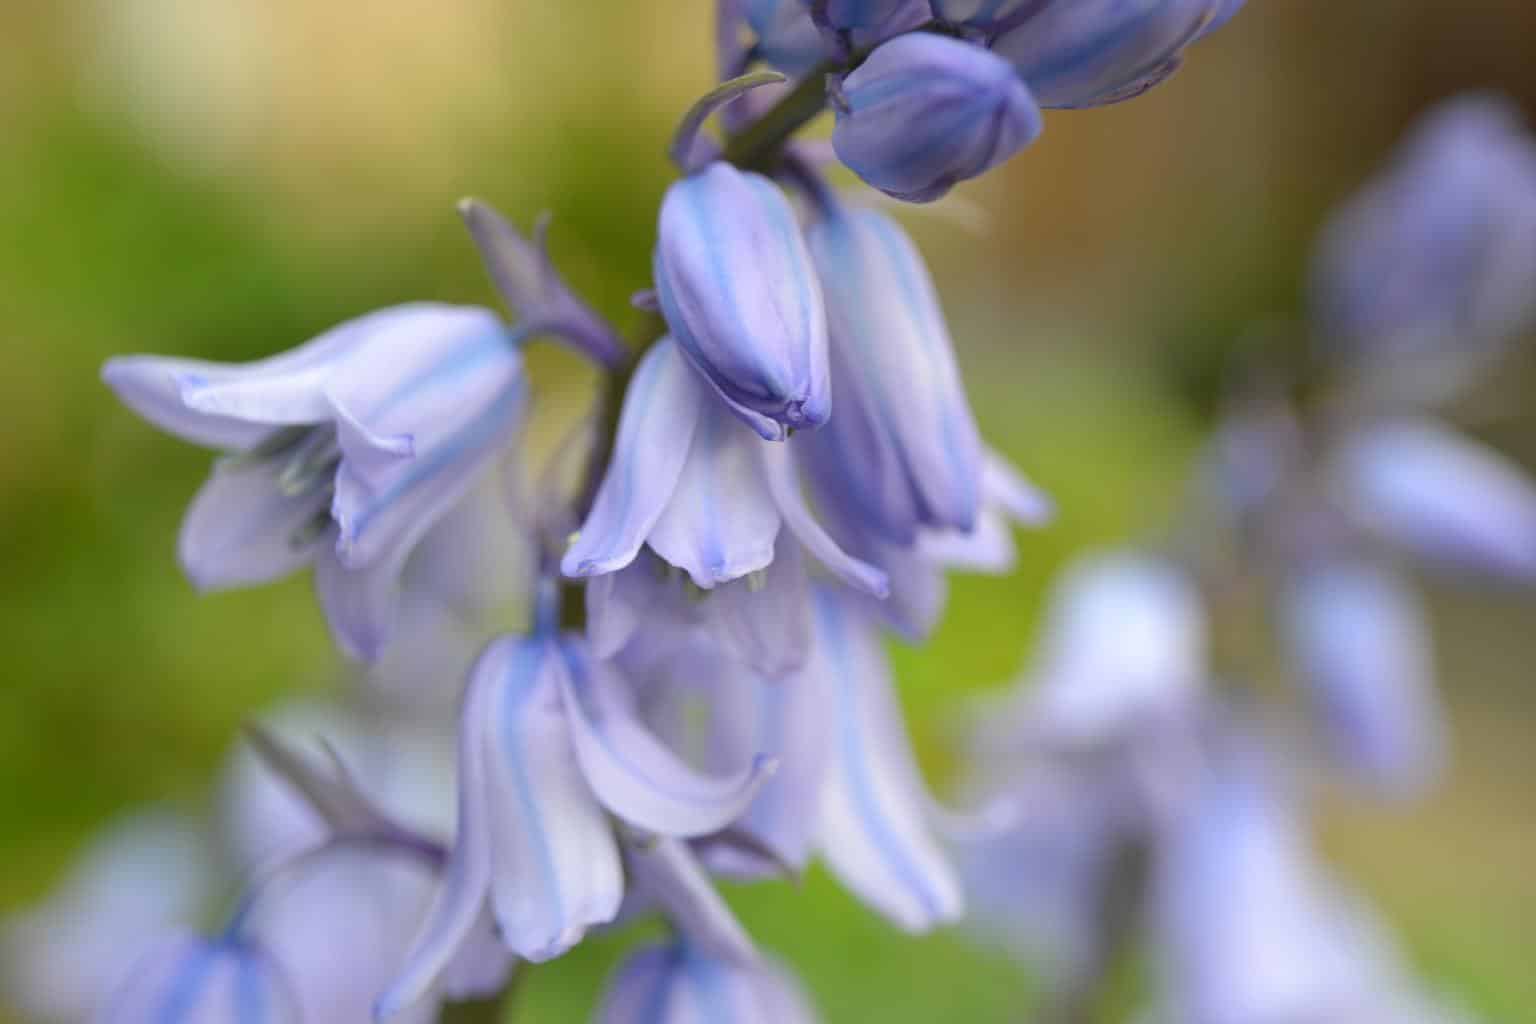 Bluebell meaning and symbolism